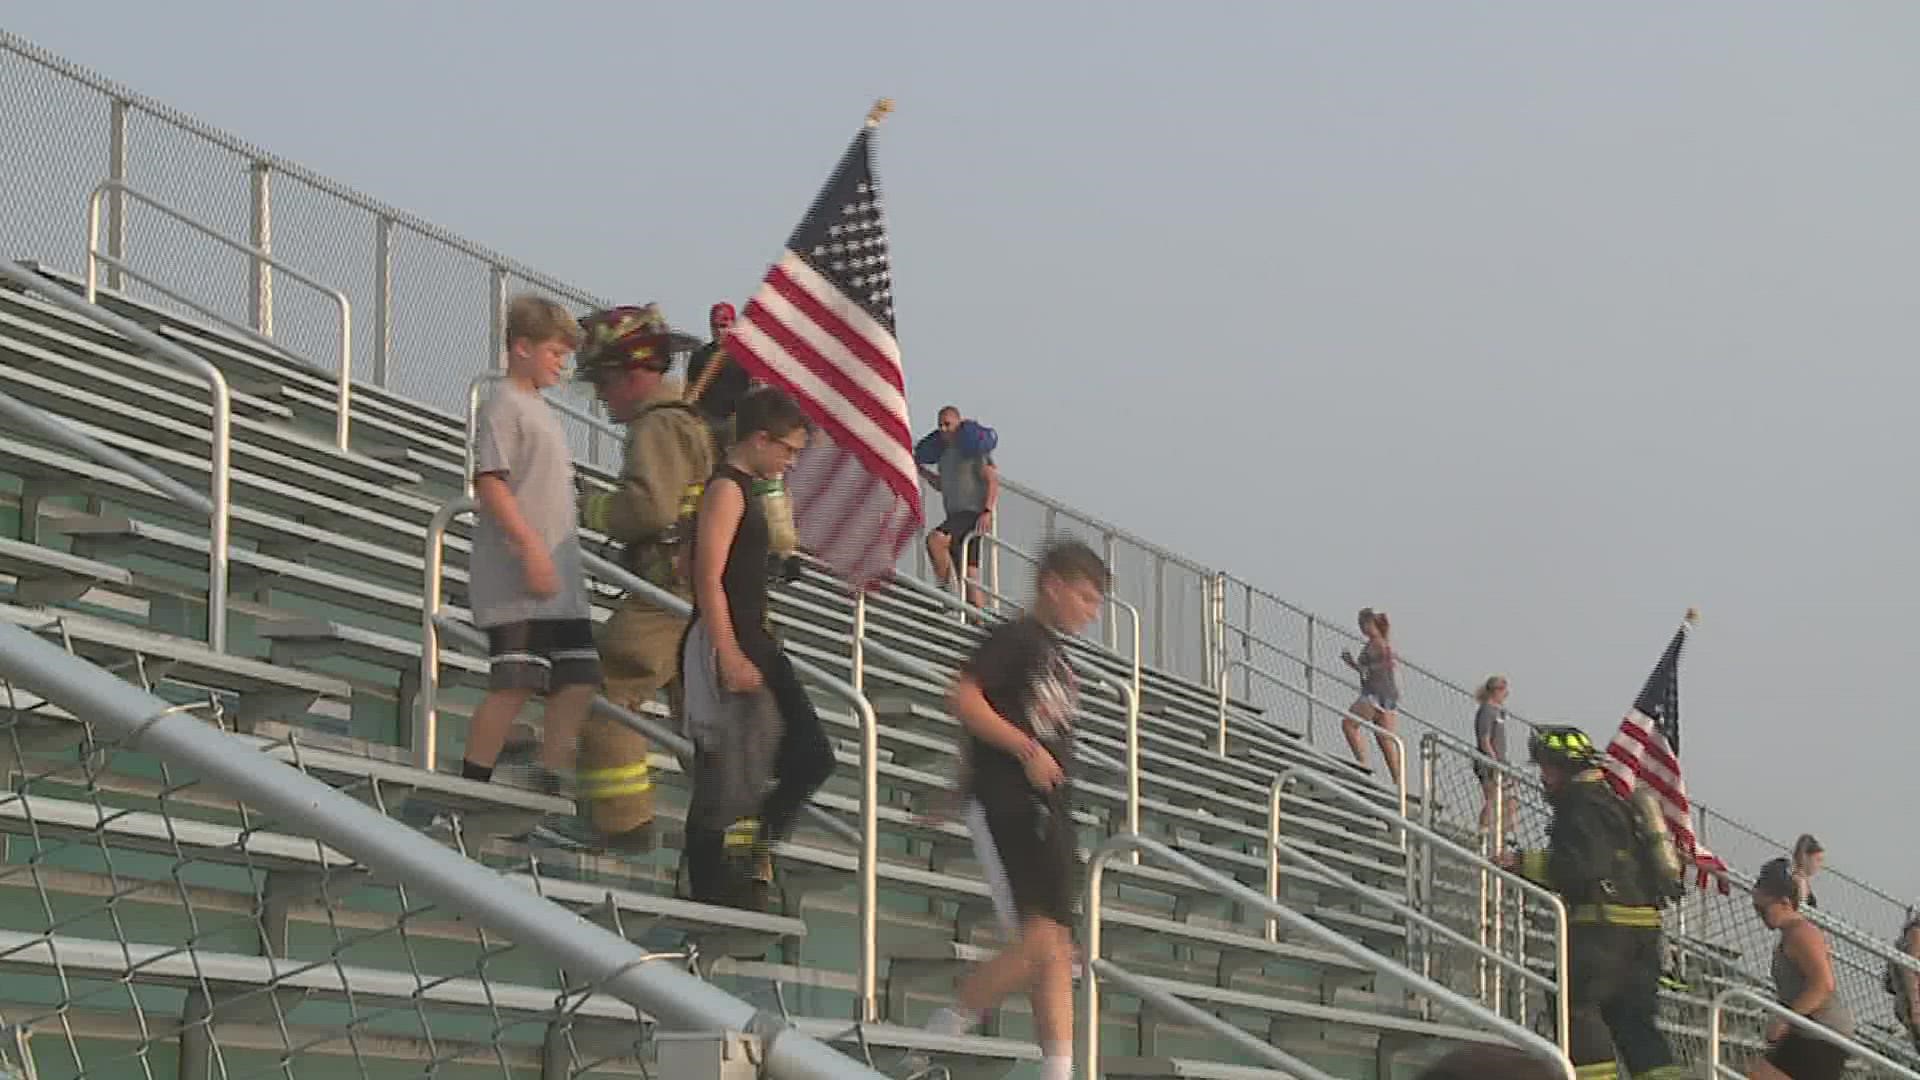 Community members, local firefighters and police officers gathered at Geneseo High School to climb the bleachers in honor of those who lost their lives on Sept. 11.